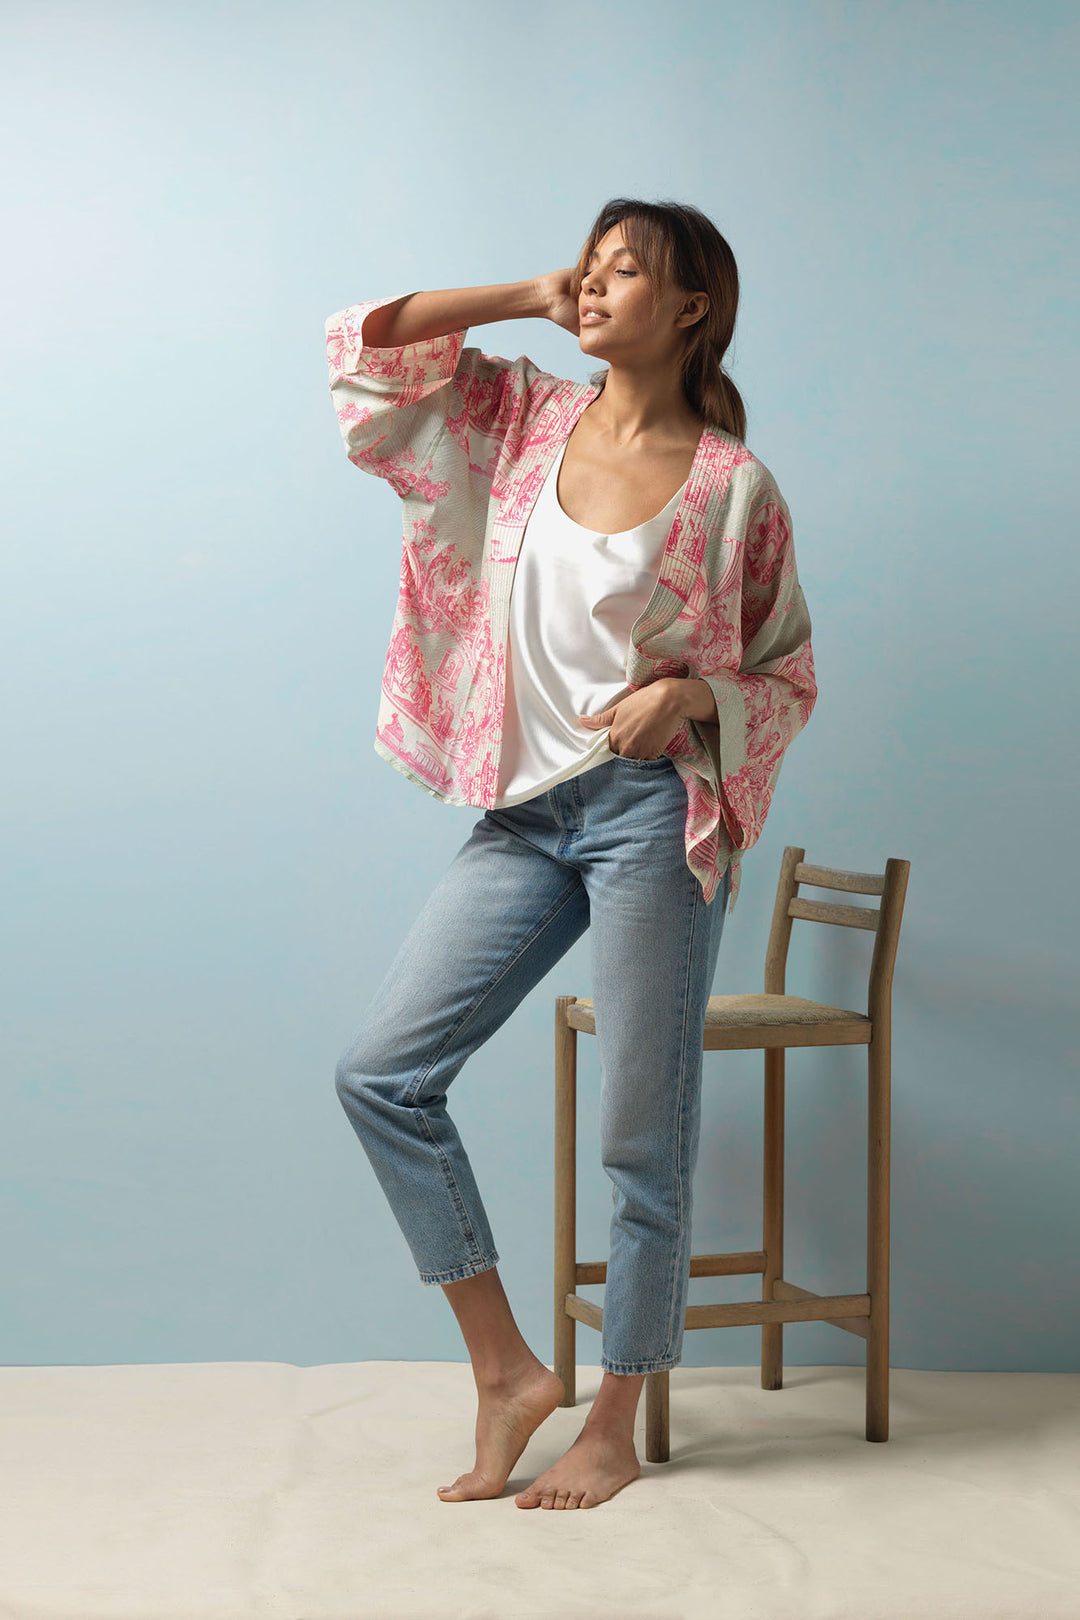 Pink print kimono inspired by classic French Toile De Jouy fabrics